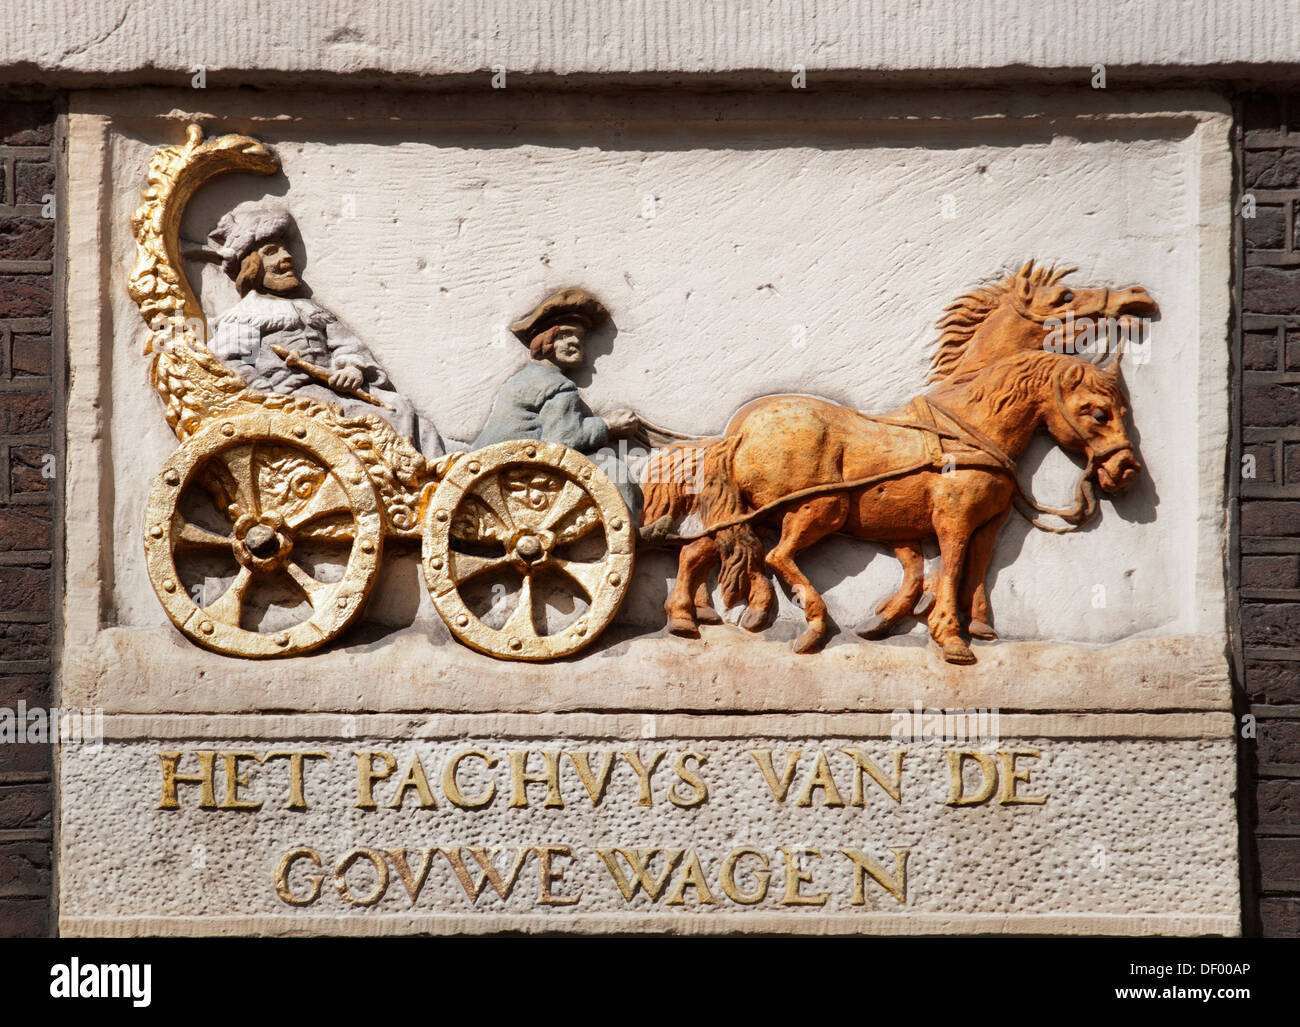 Horse Cart Amsterdam Netherlands House antique plaque wall tablet Stock Photo